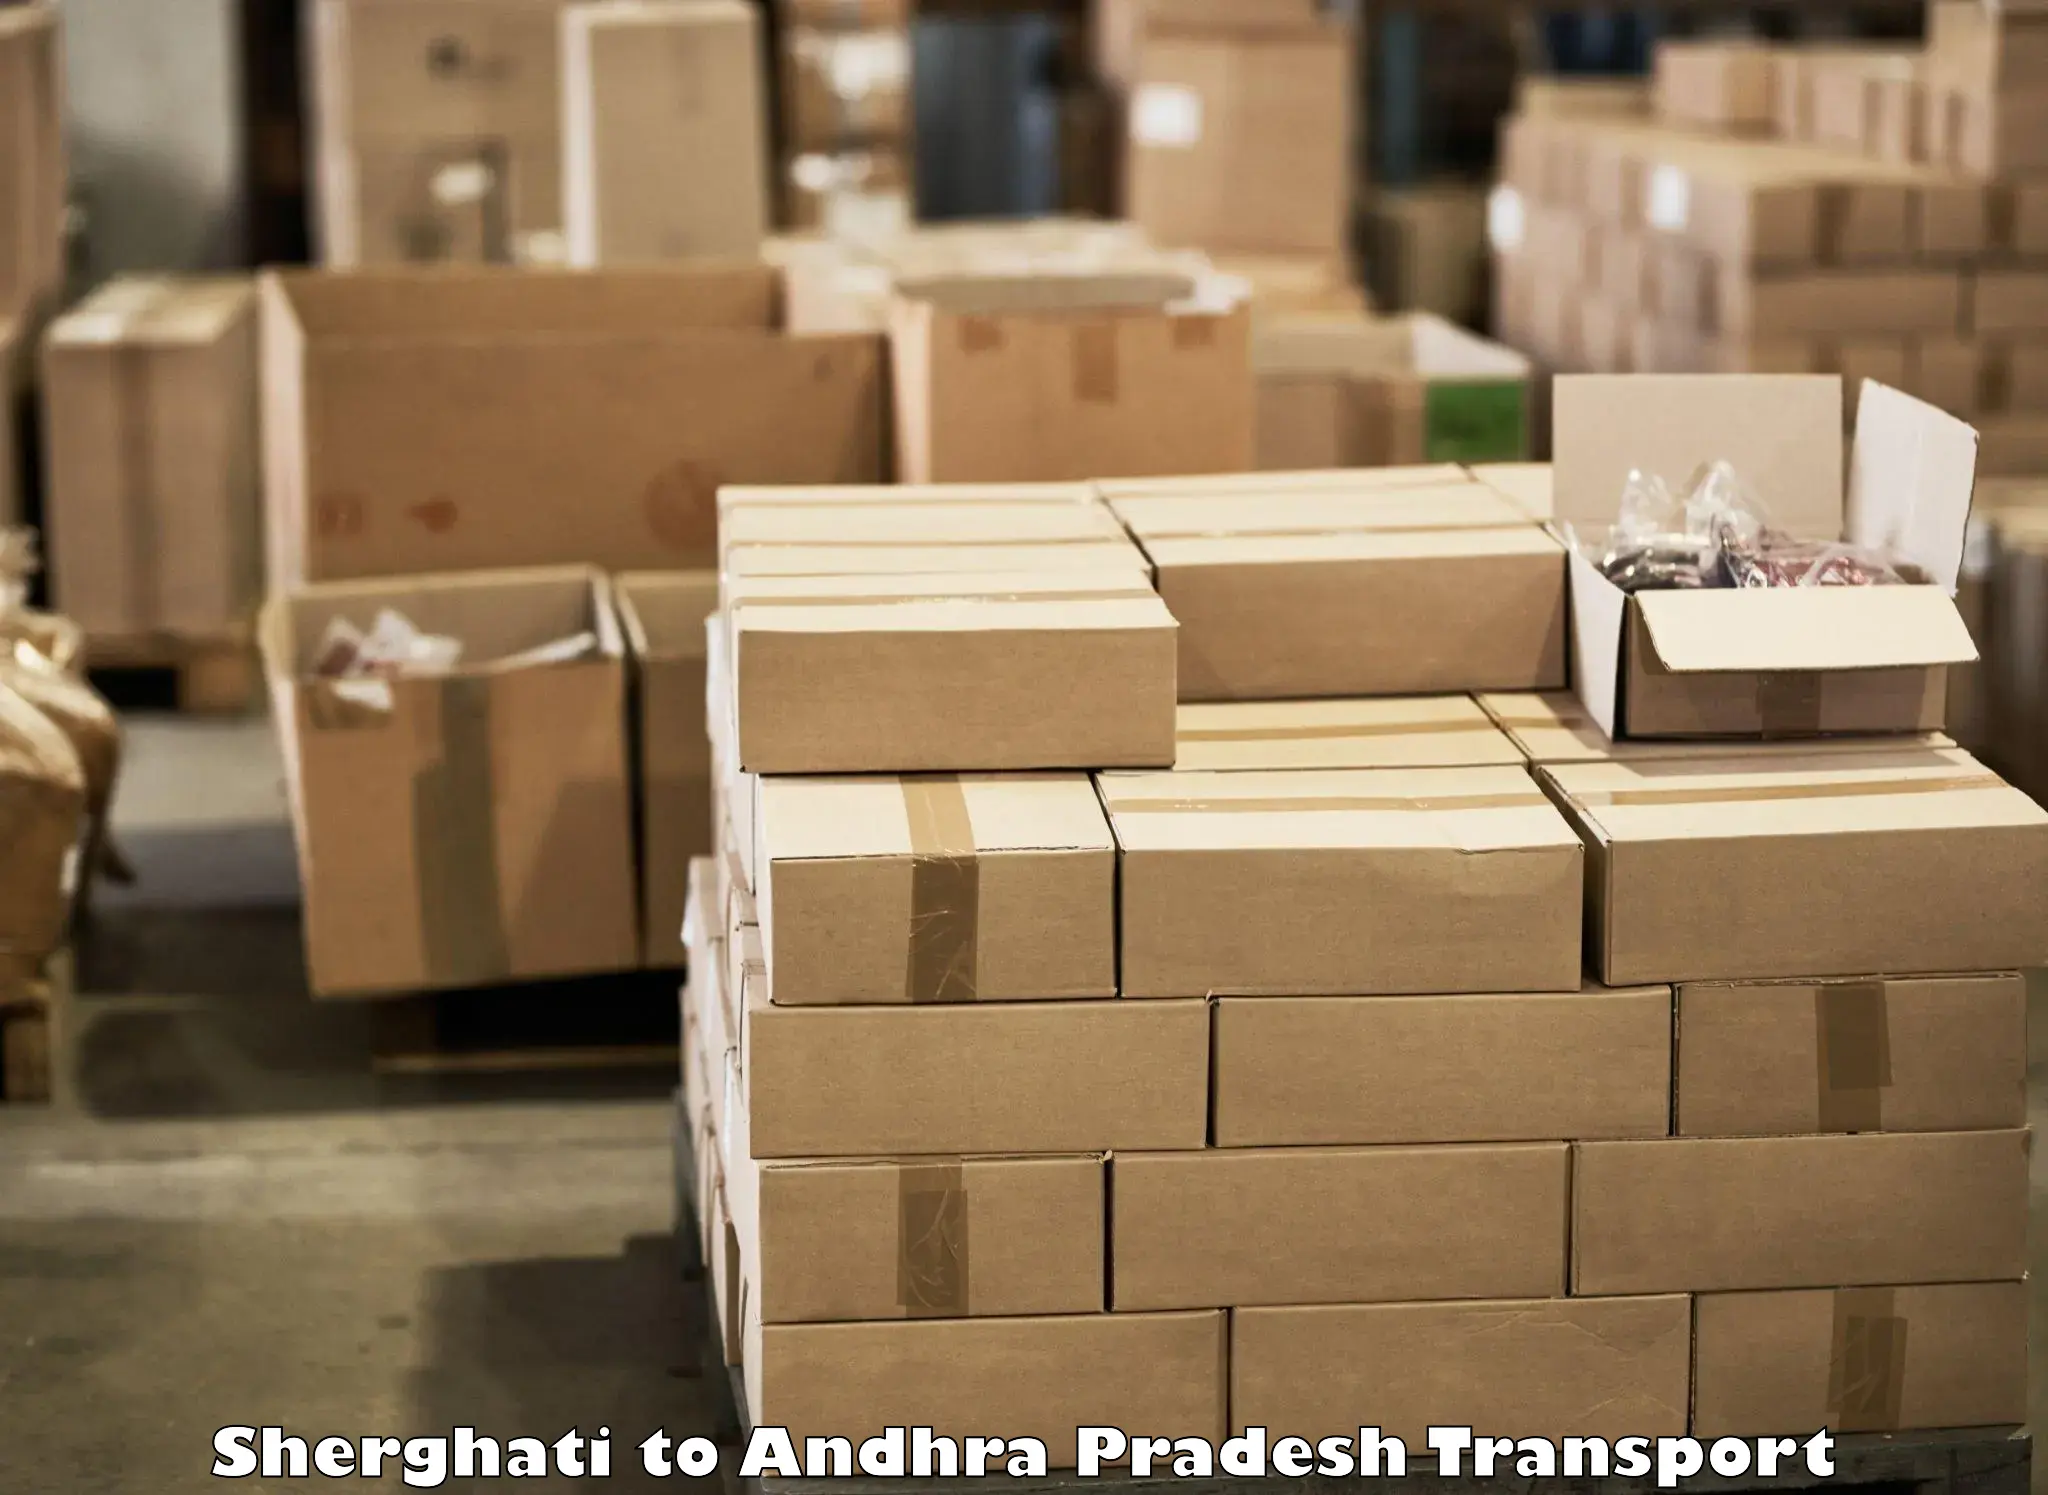 Air freight transport services Sherghati to Visakhapatnam